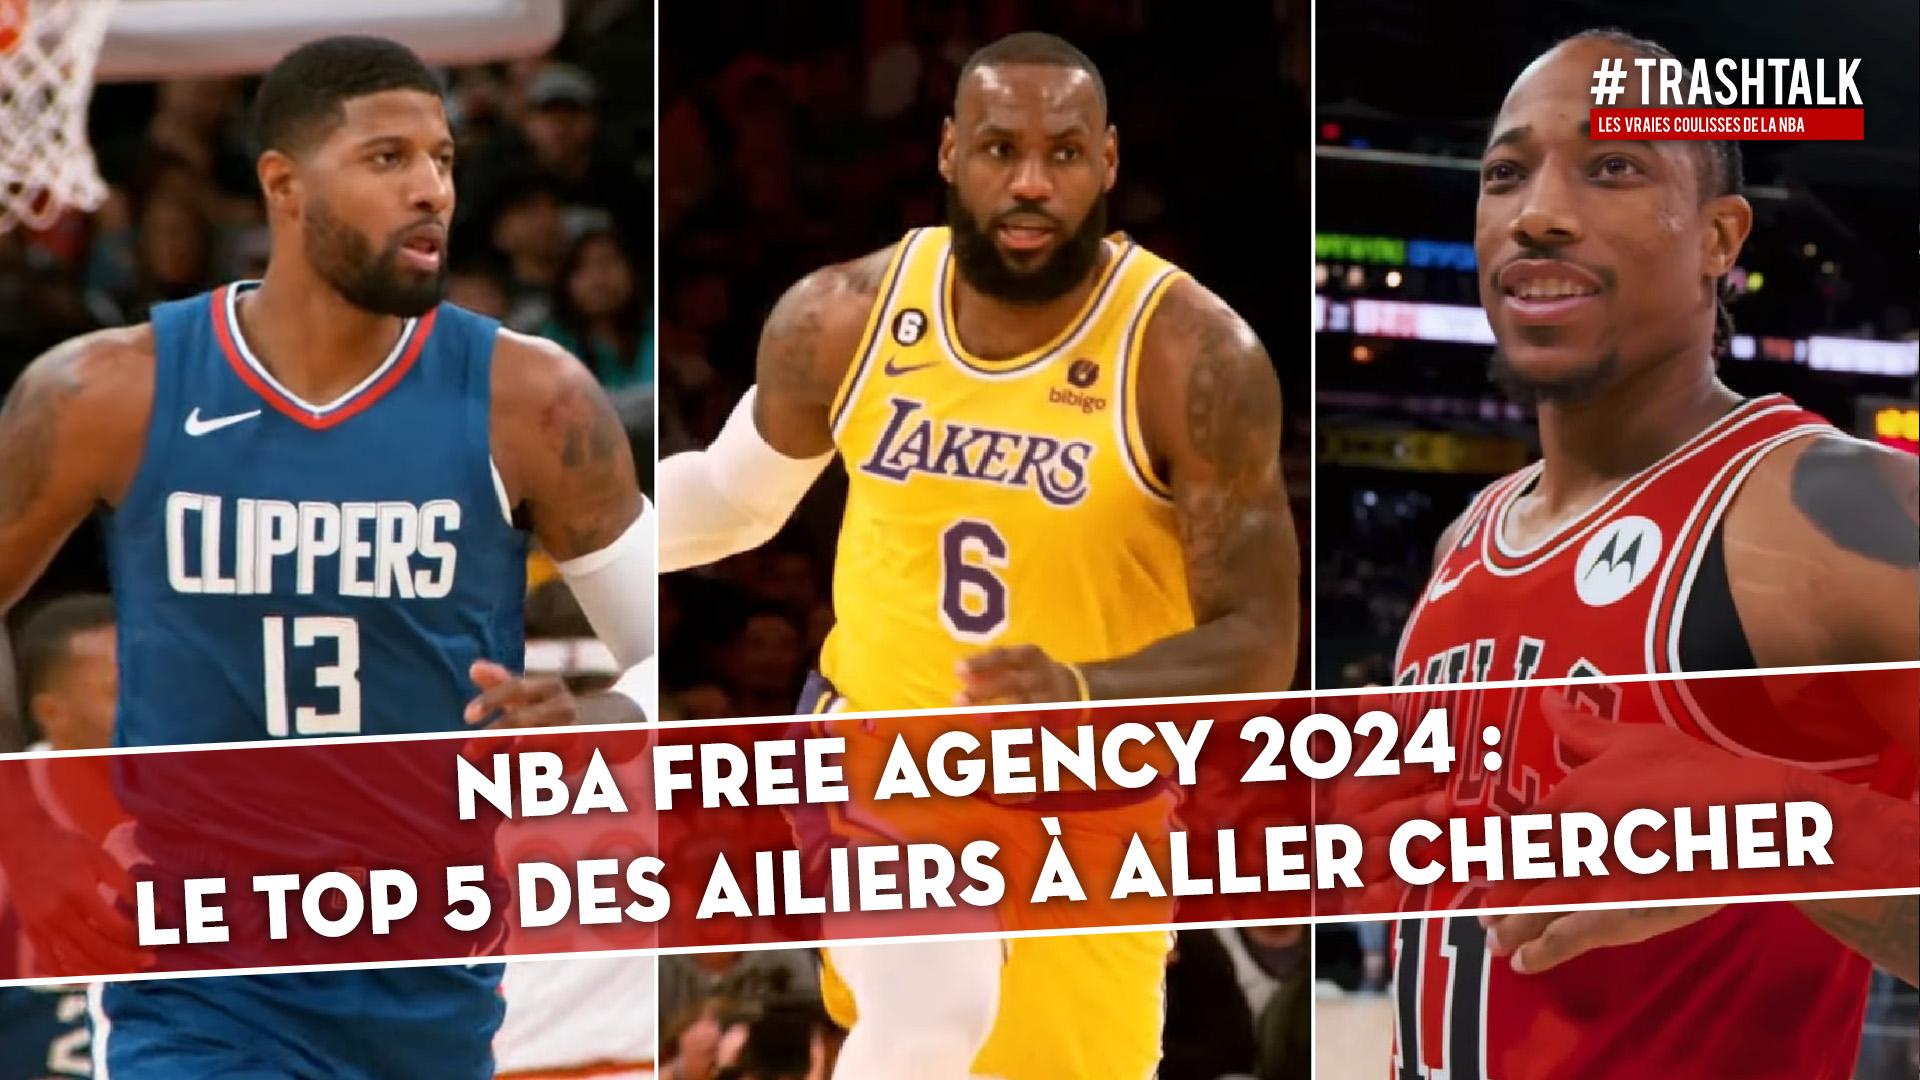 NBA Free Agency 2024 Top 5 Ailiers disponibles 24 juin 2024